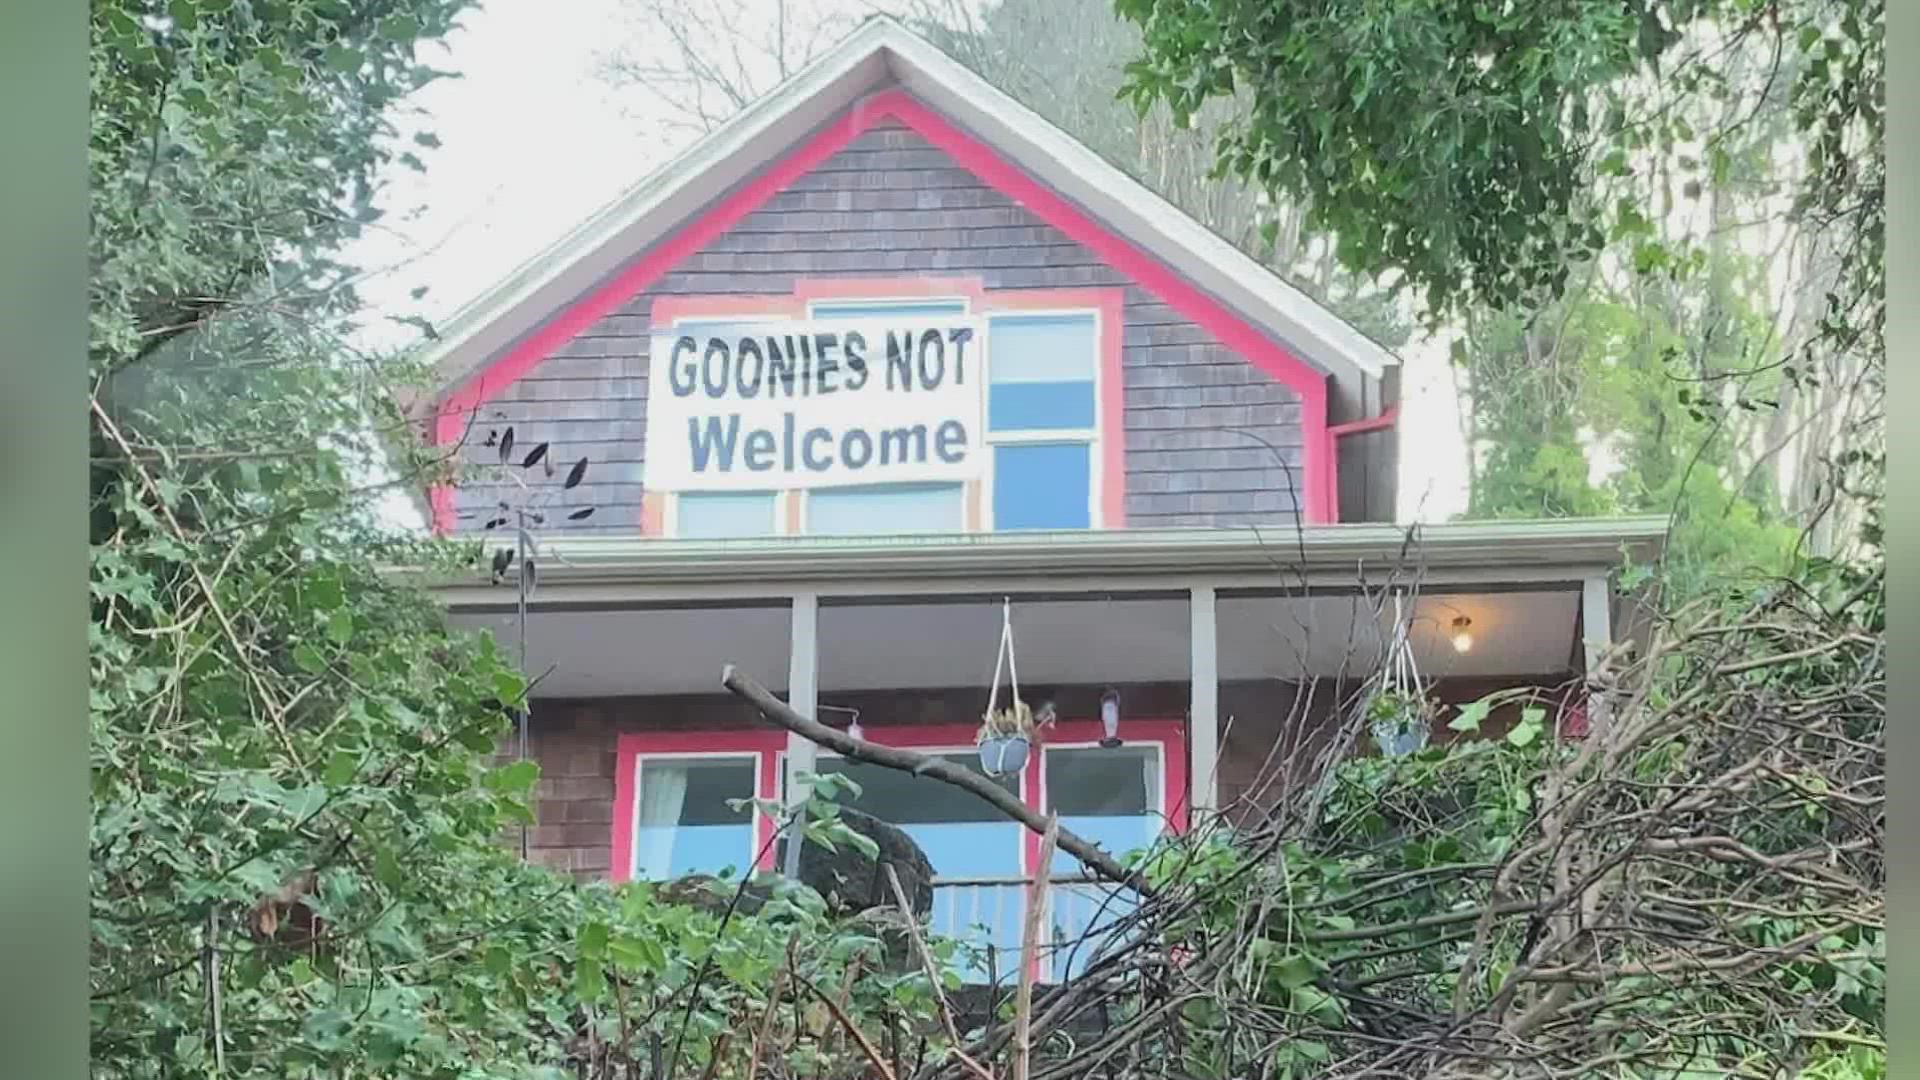 One neighbor's banner reads, "Goonies not welcome." The new owner's banner says they are. And a third neighbor's banner calls the first neighbor "Karen."